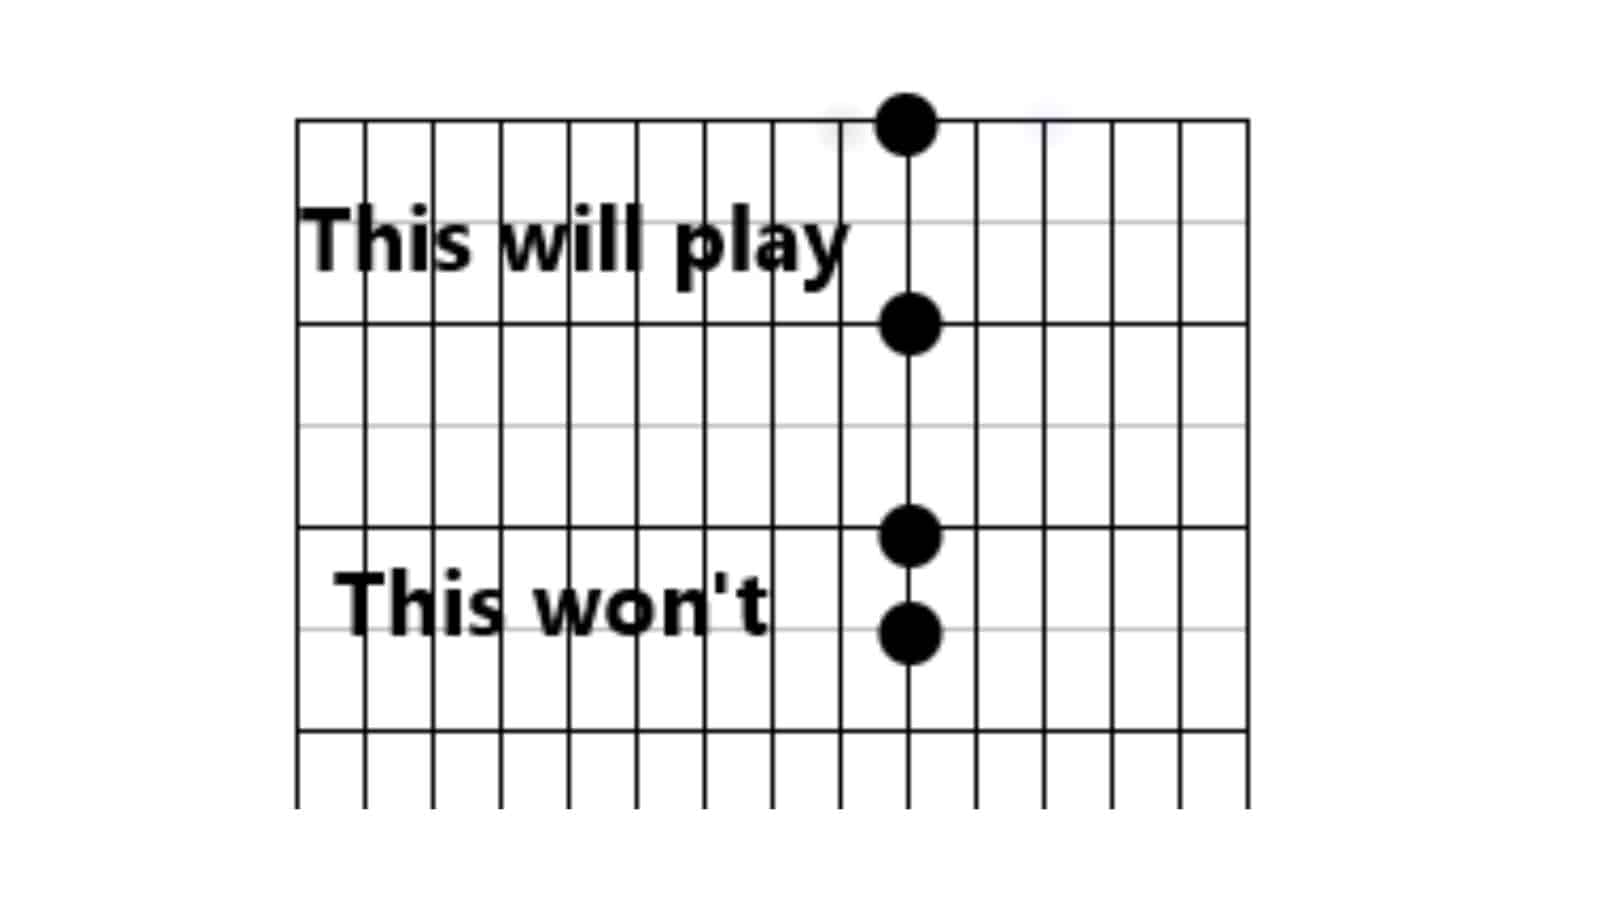 Allowing the gears enough time to play consecutive notes